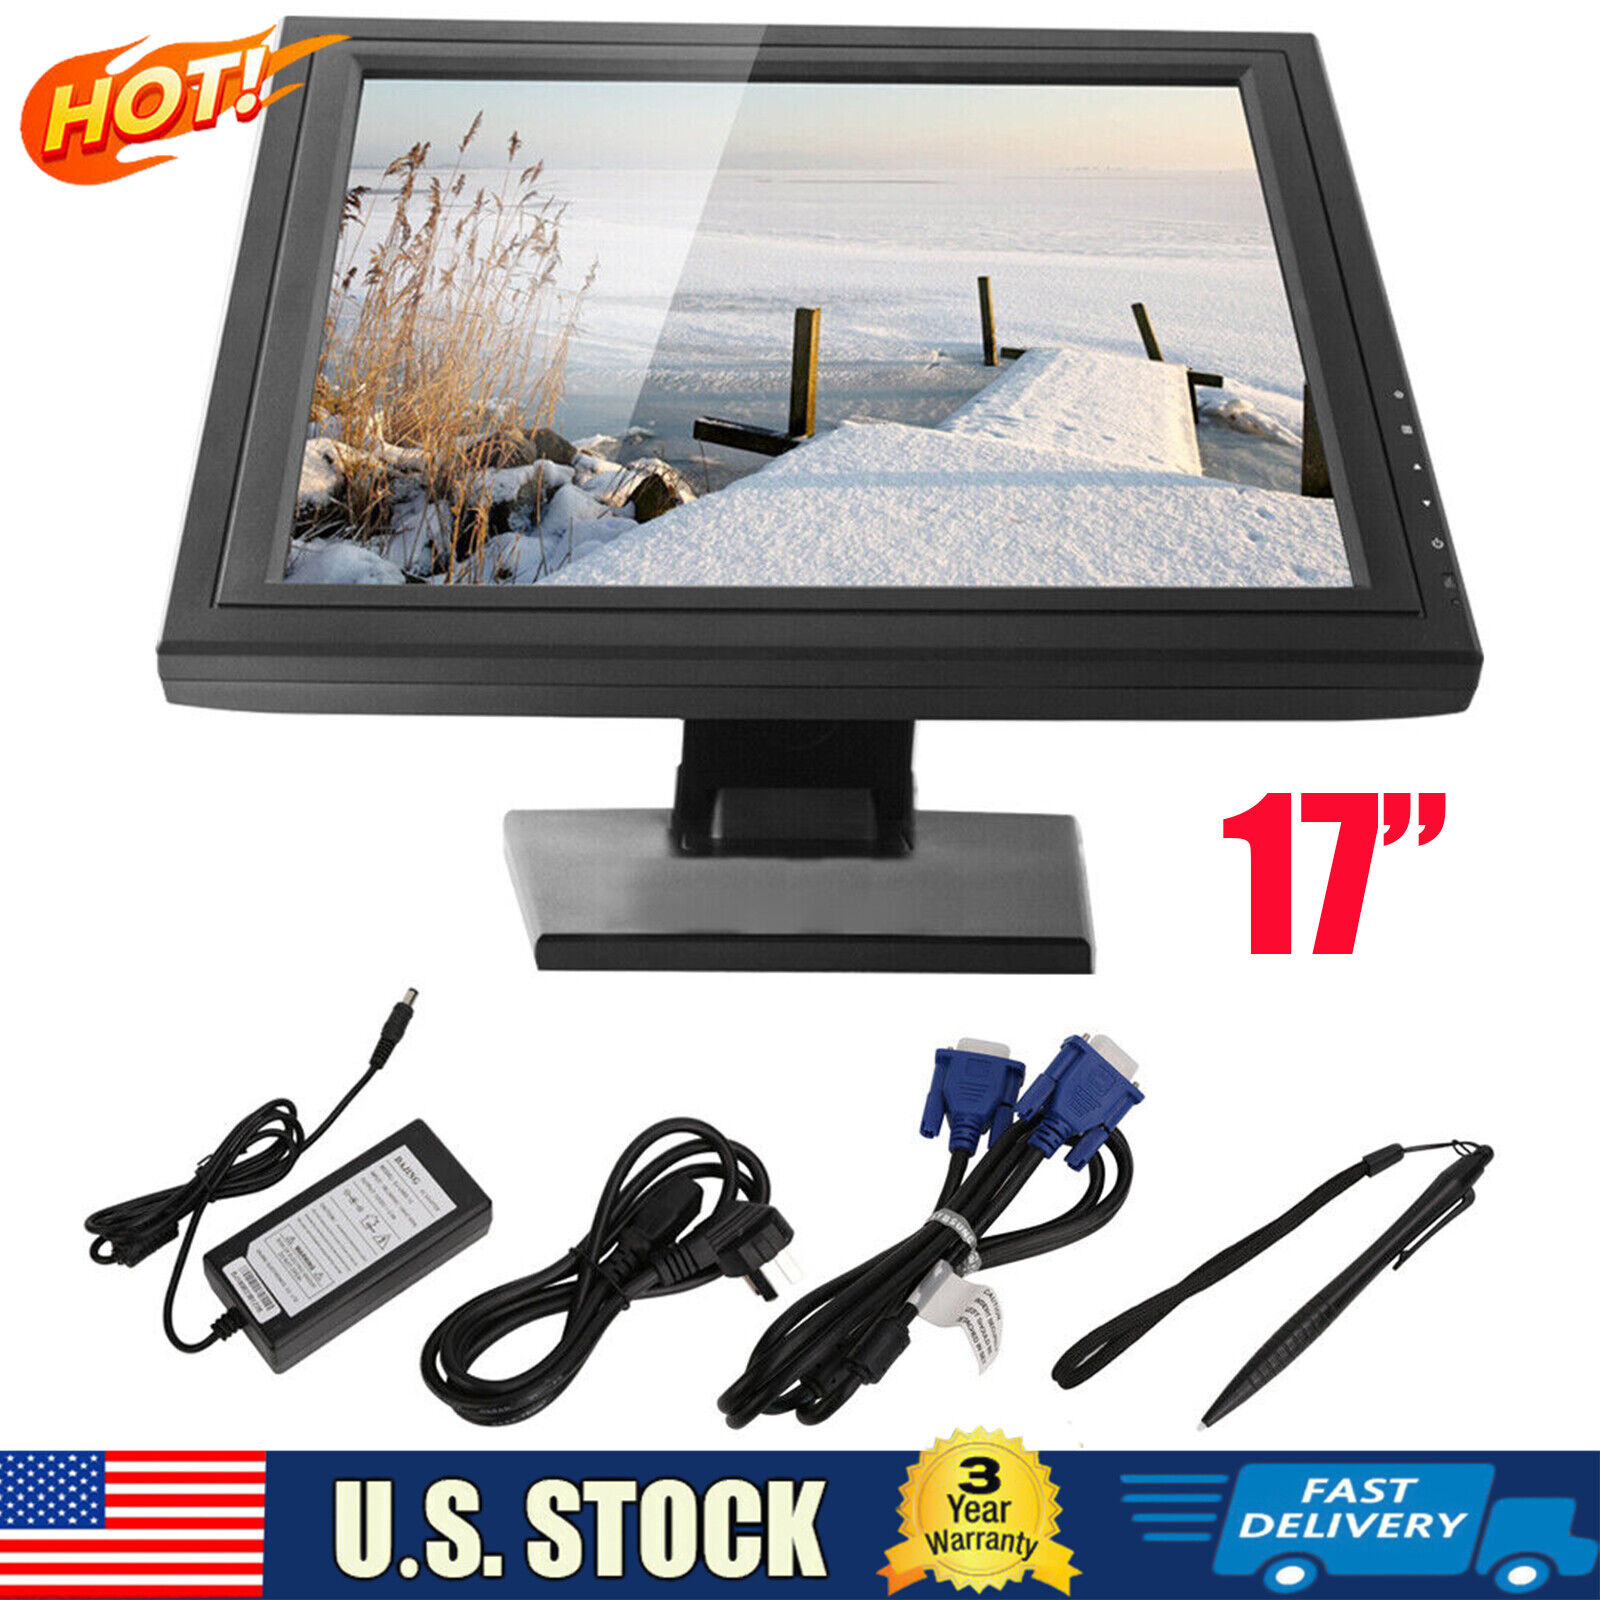 17 Inch LCD Touch Screen VGA USB Monitor Touch Screen For POS Retail Restaurant